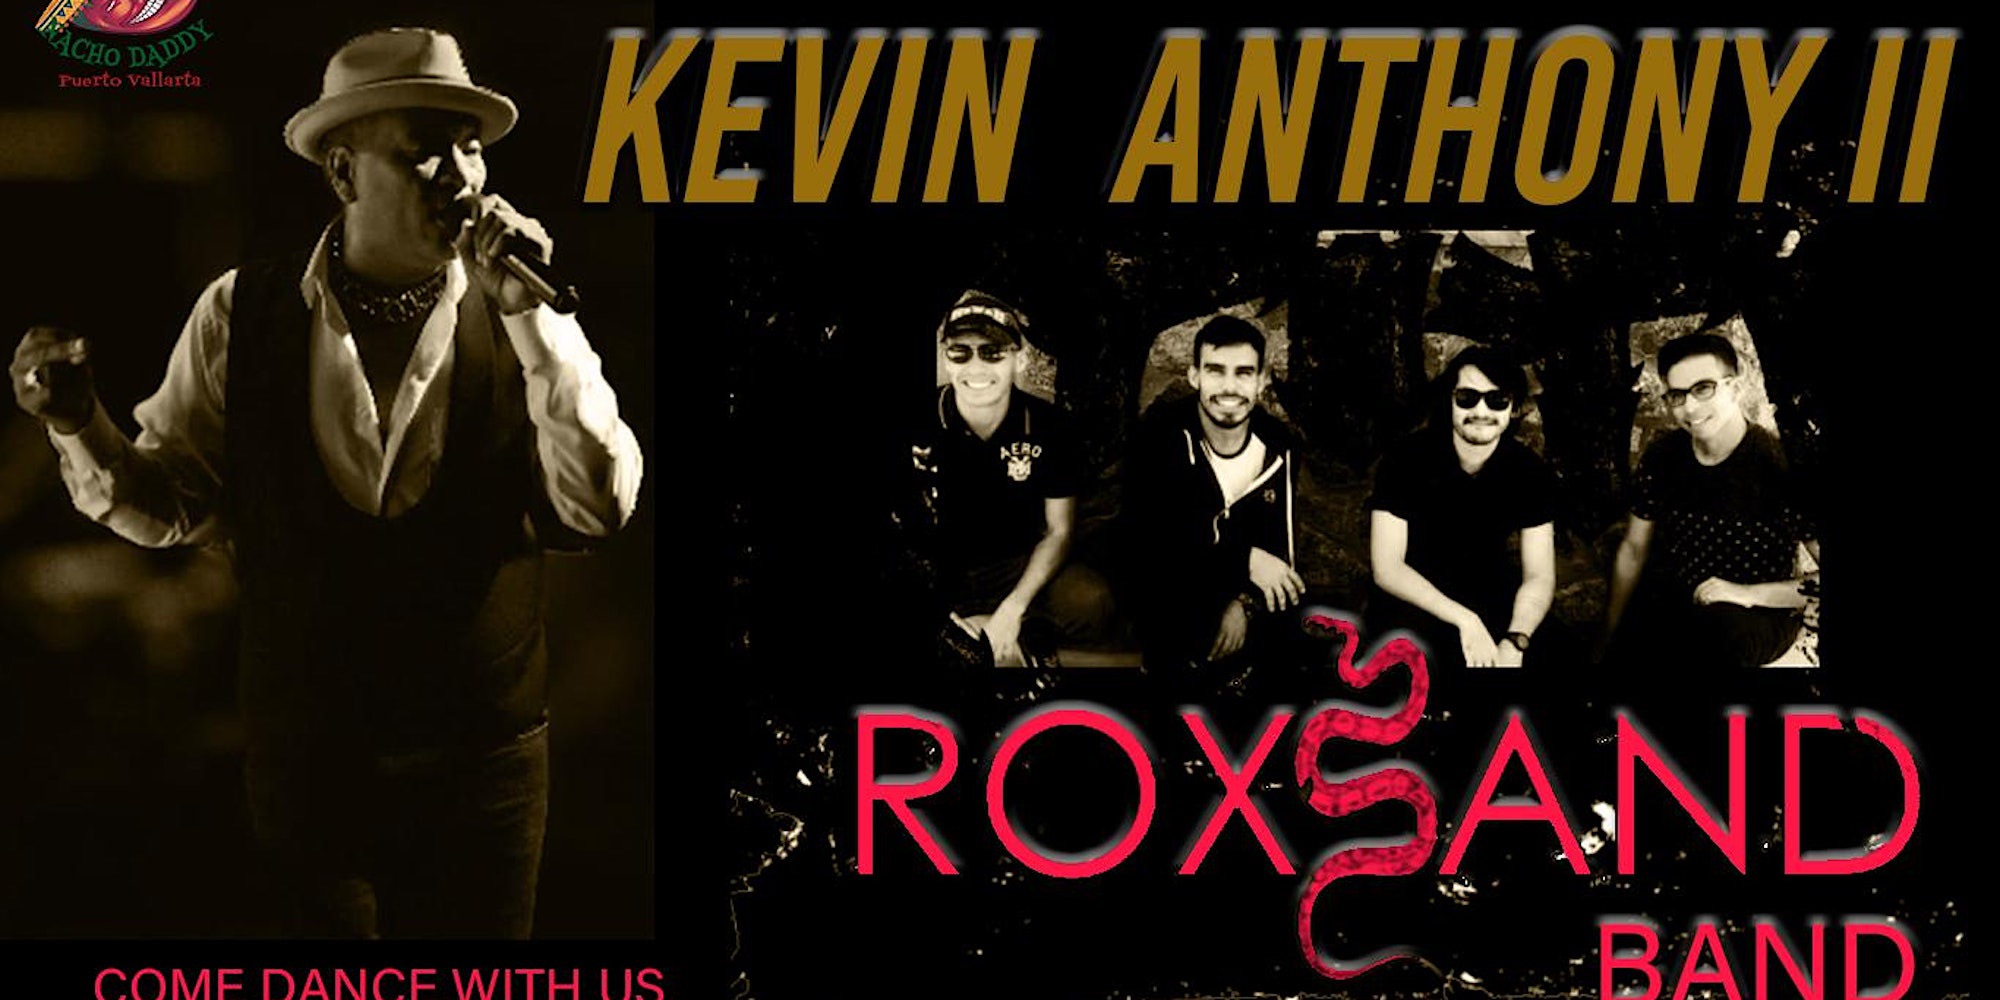 Kevin Anthony II & The Roxand Band